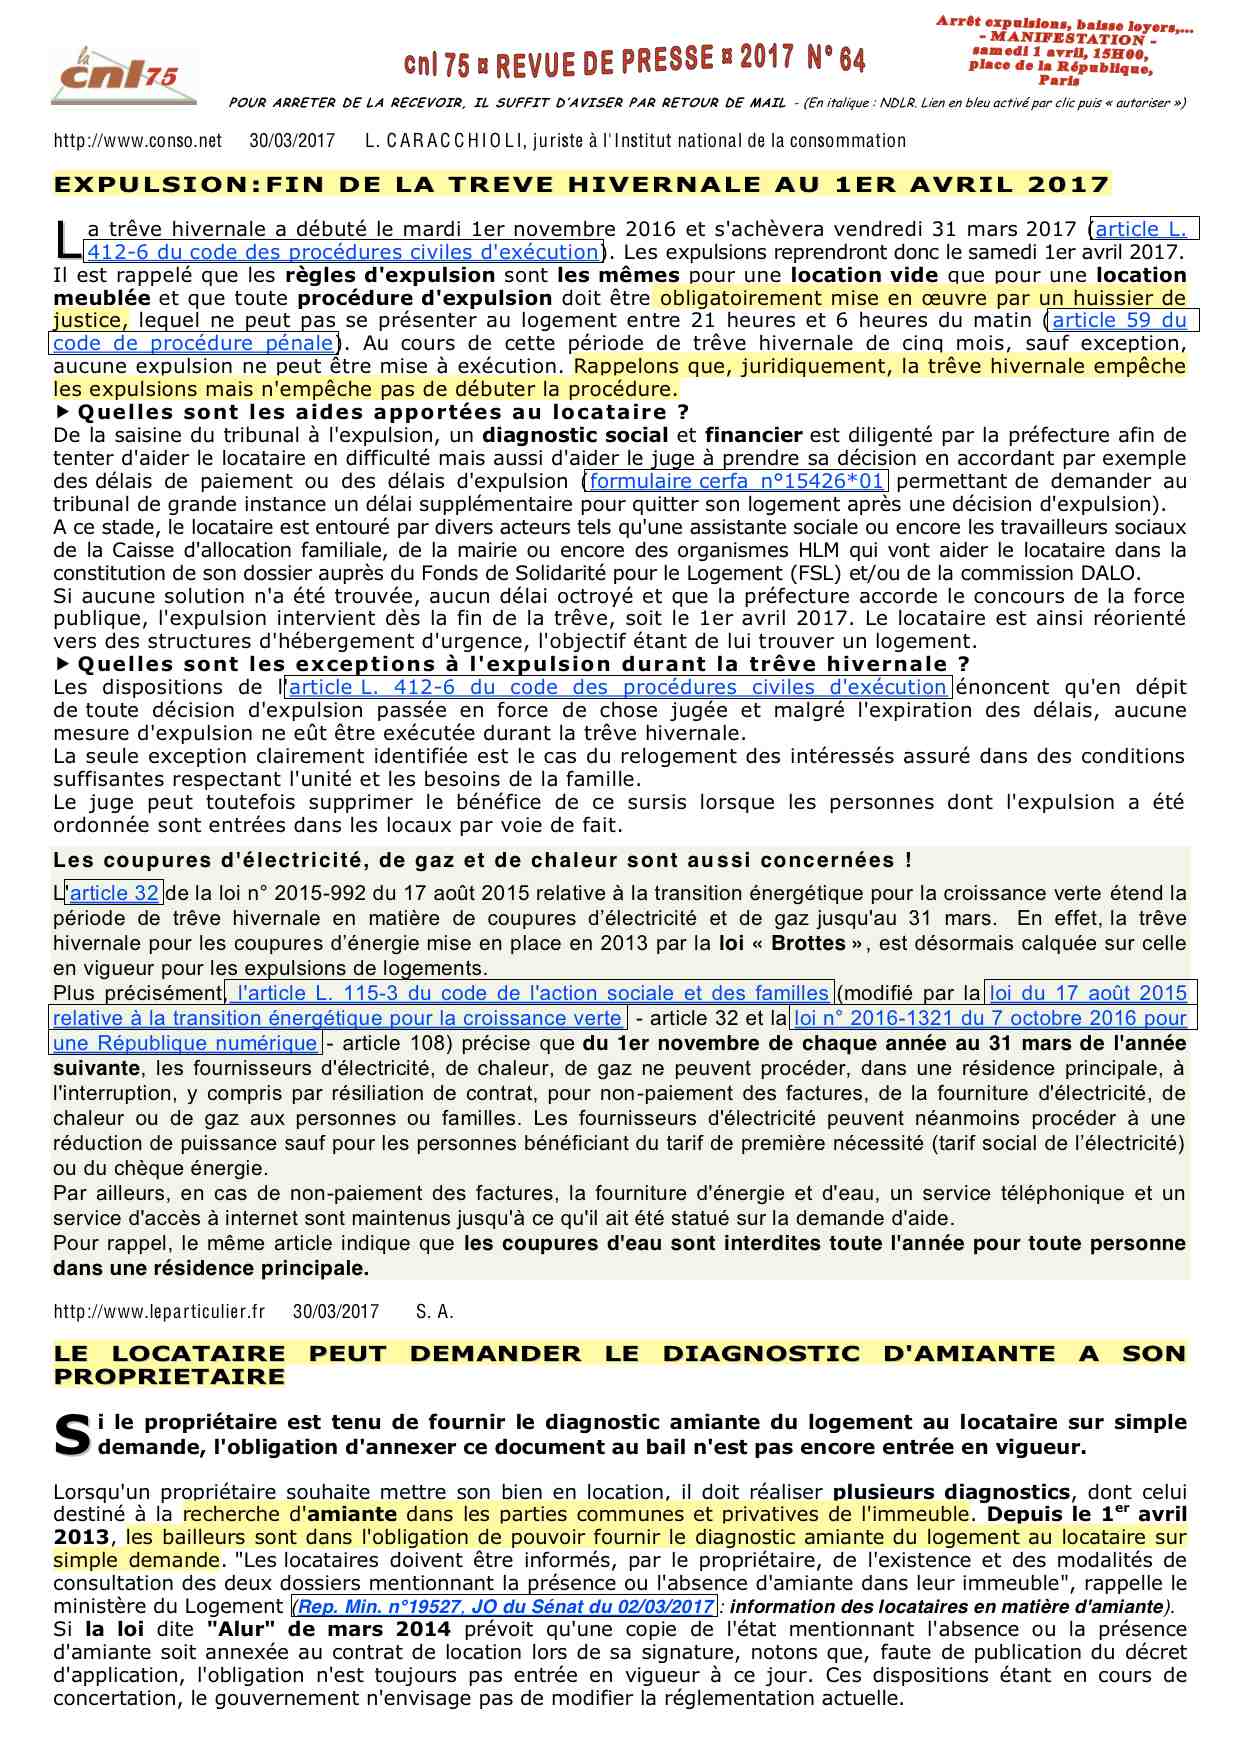 2017-n°64 - FIN TREVE HIVERNALE - DIAGNOSTIC AMIANTE _ INFORMATION LOCATAIRES.jpg